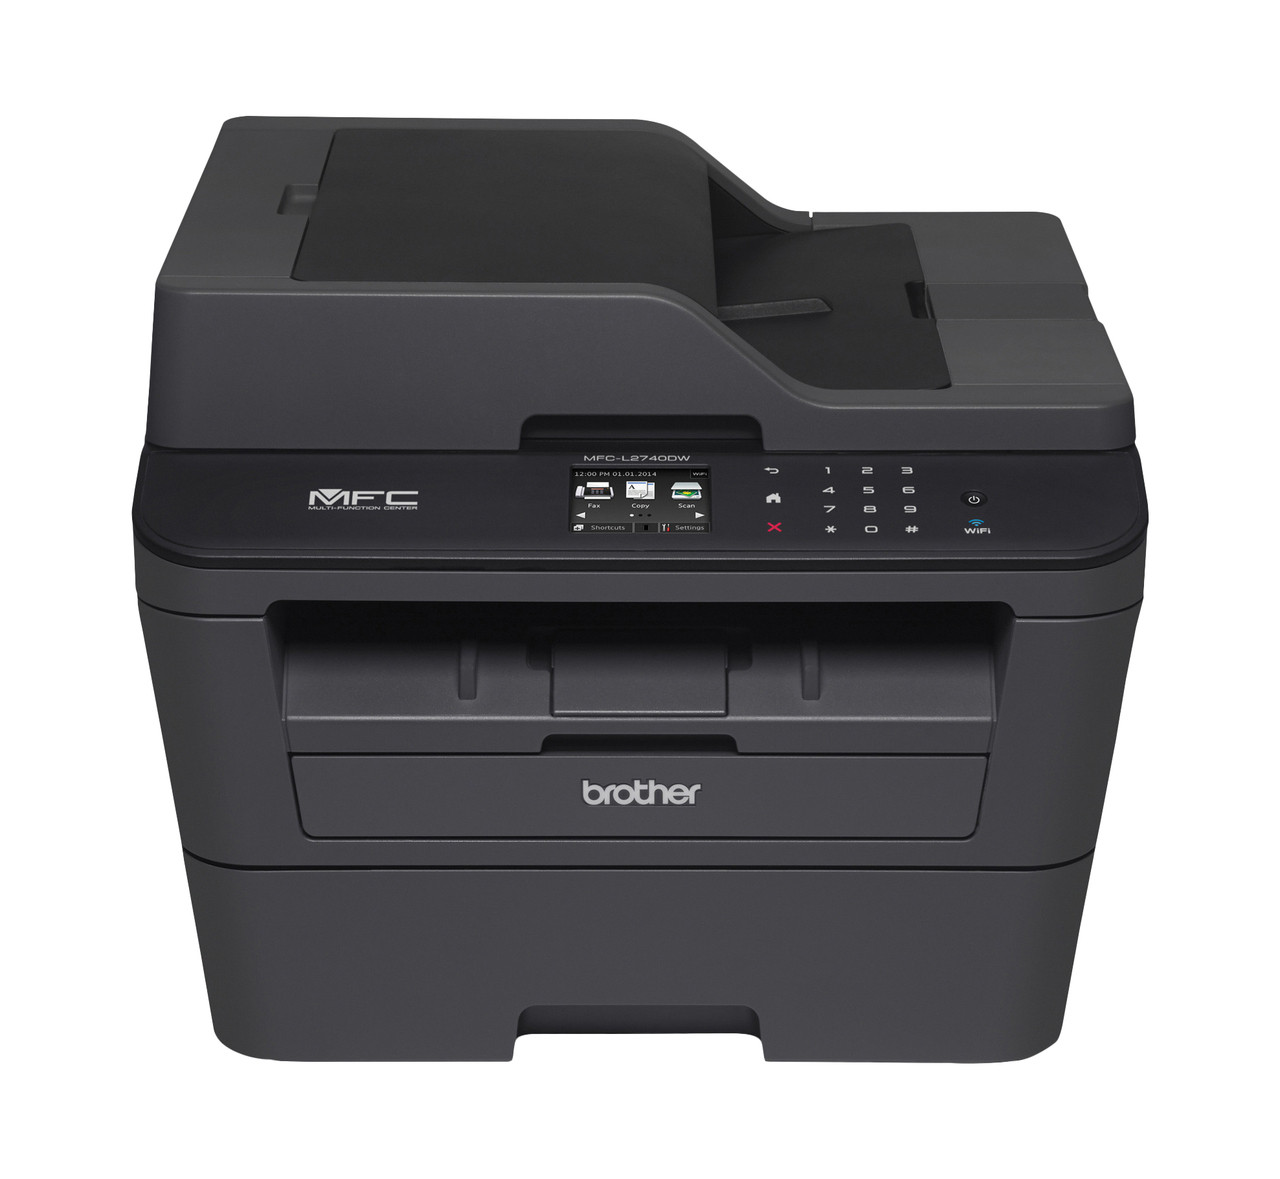 Brother MFC-L2740DW 2400 x 600DPI Laser A4 30ppm Wi-Fi multifunctional